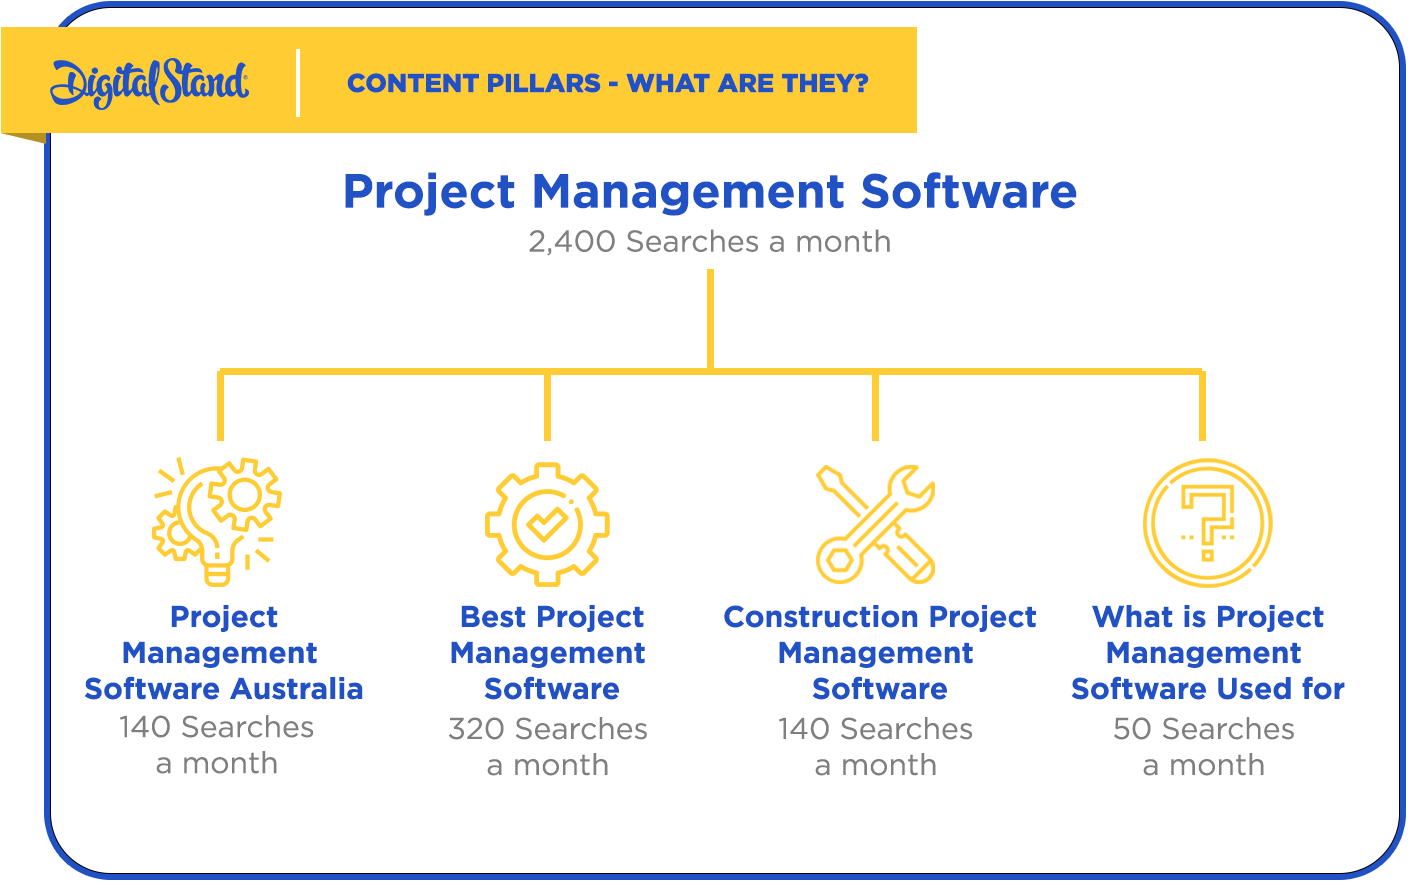 Project Management Search Volumes